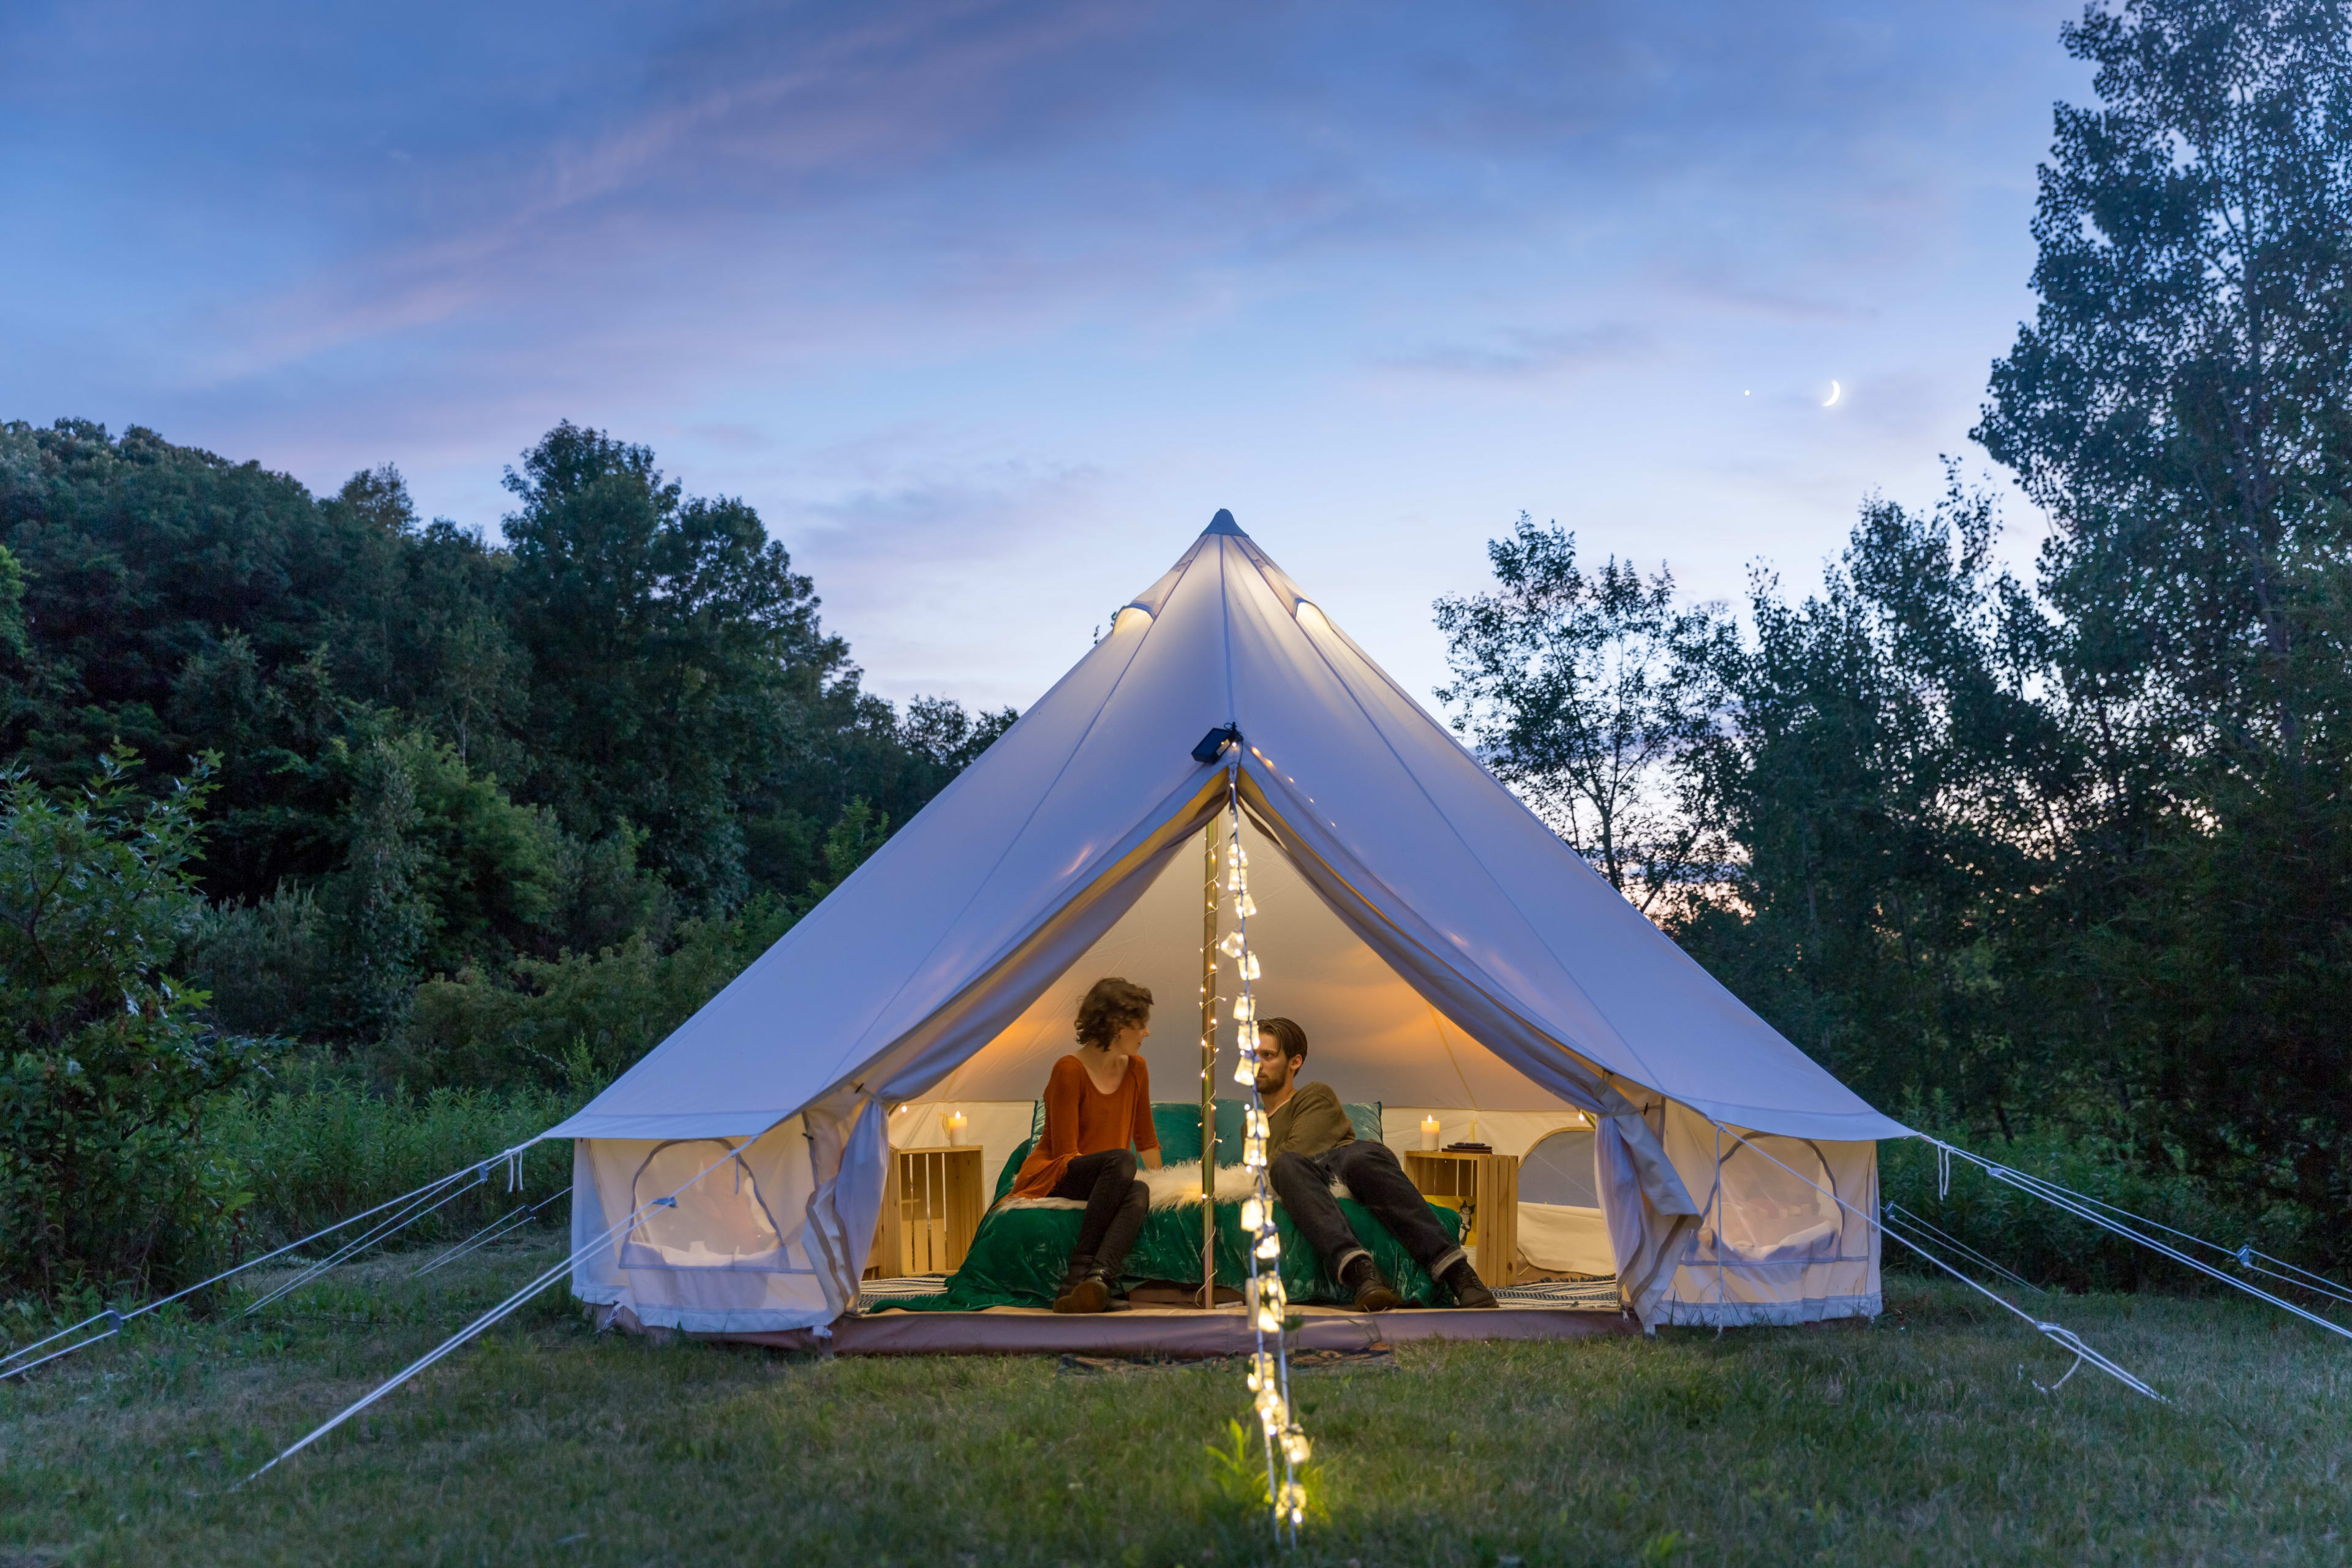 There is nothing more magical than a tent at twilight.  The bell tent is set up with pretty string lights on the posts and down the front, as well as a lantern hanging from inside the top, so even after dark the tent was an inviting place to hang out.